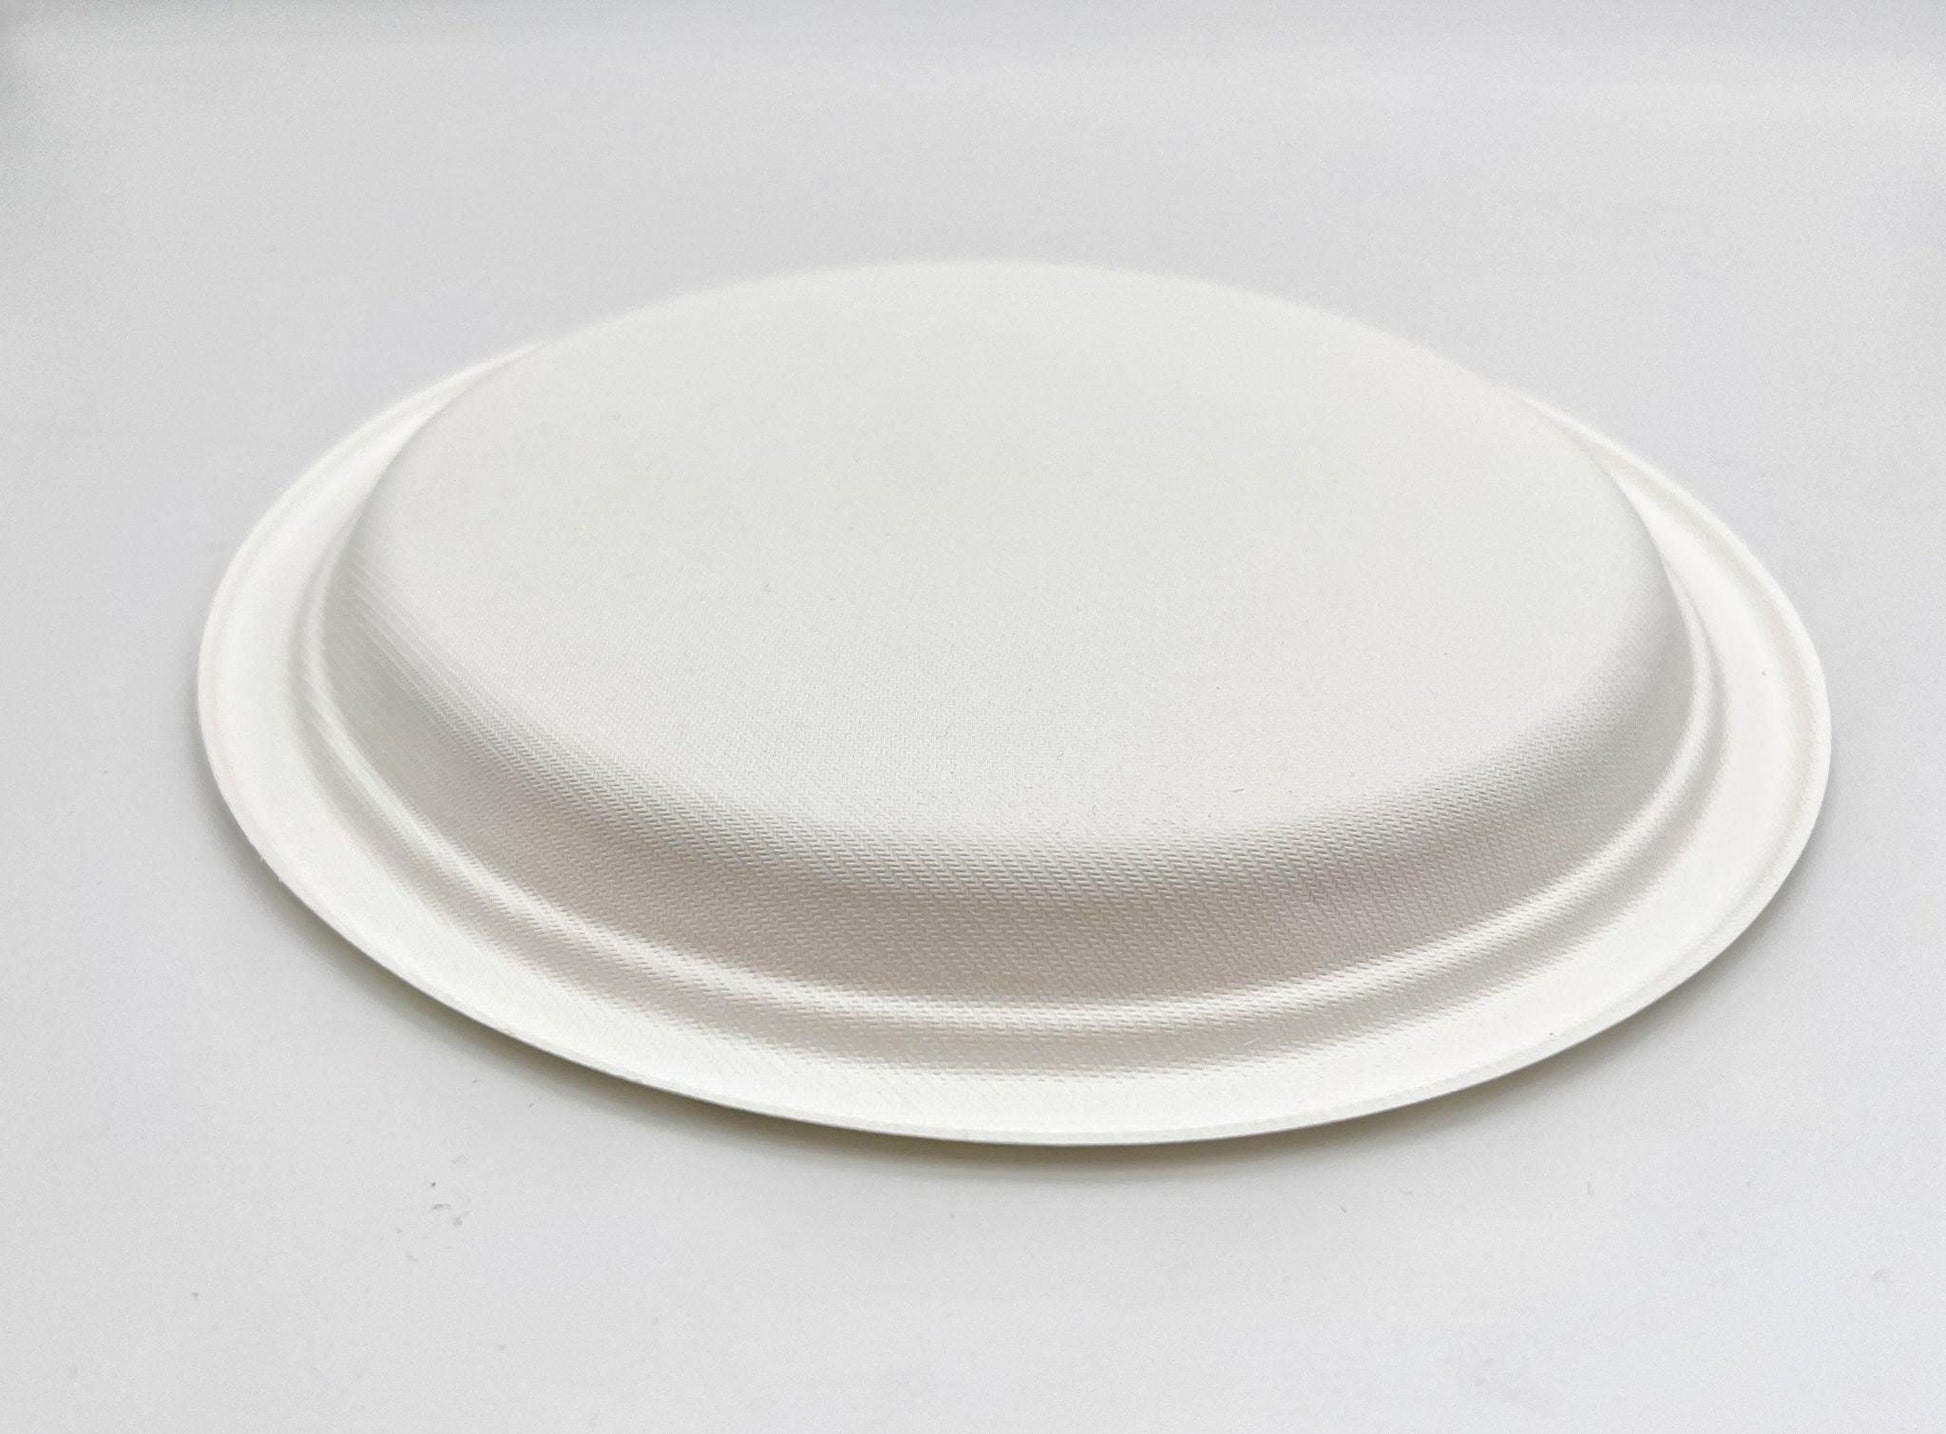 10” Plates with 3 Slots – 500 Pieces - Memeda US